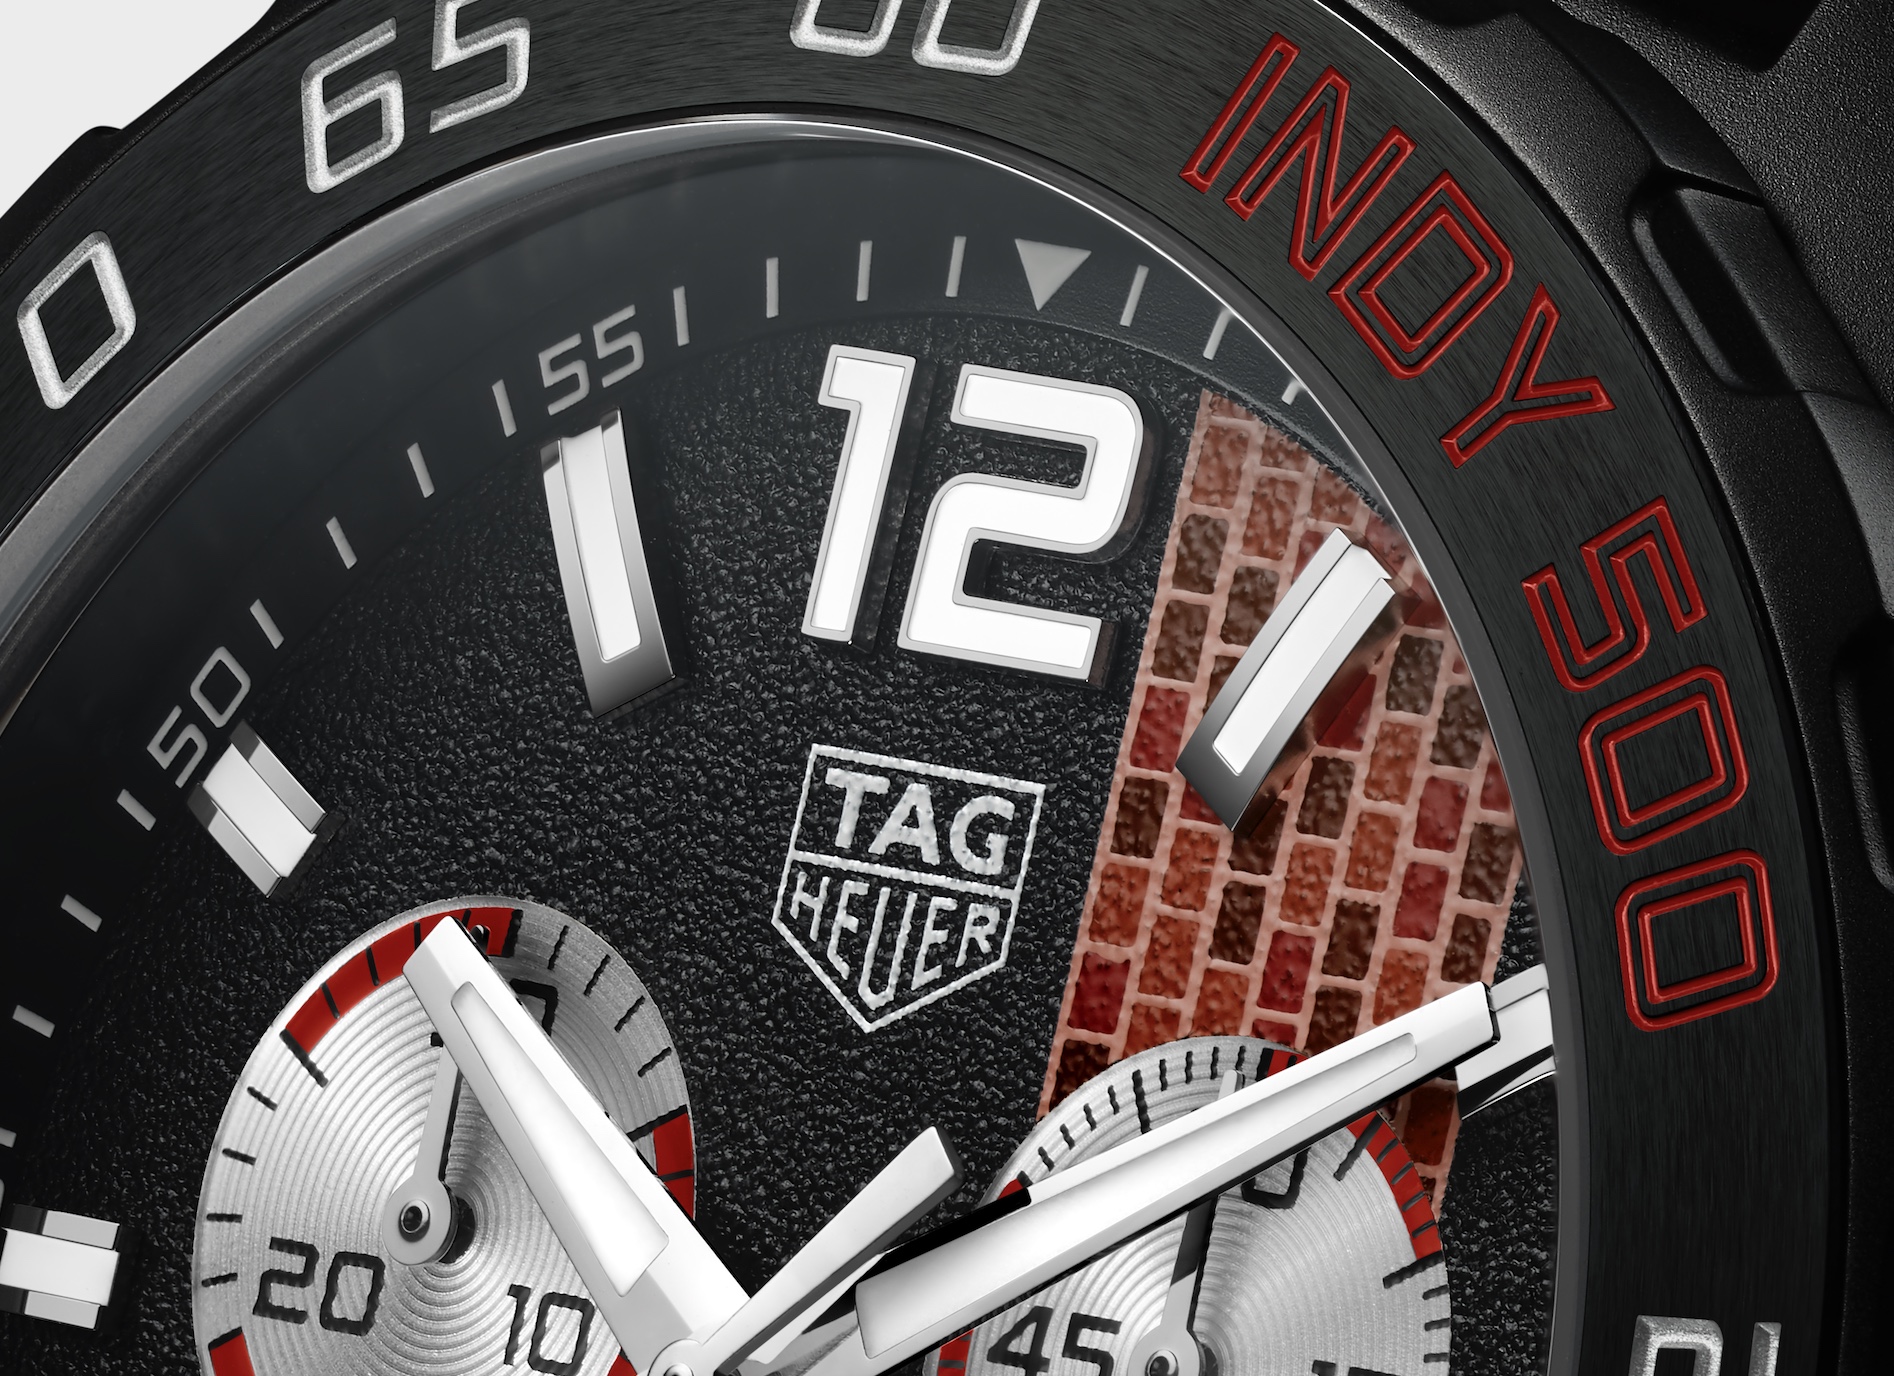 aria-label="TAG Heuer Indy Detail 1"